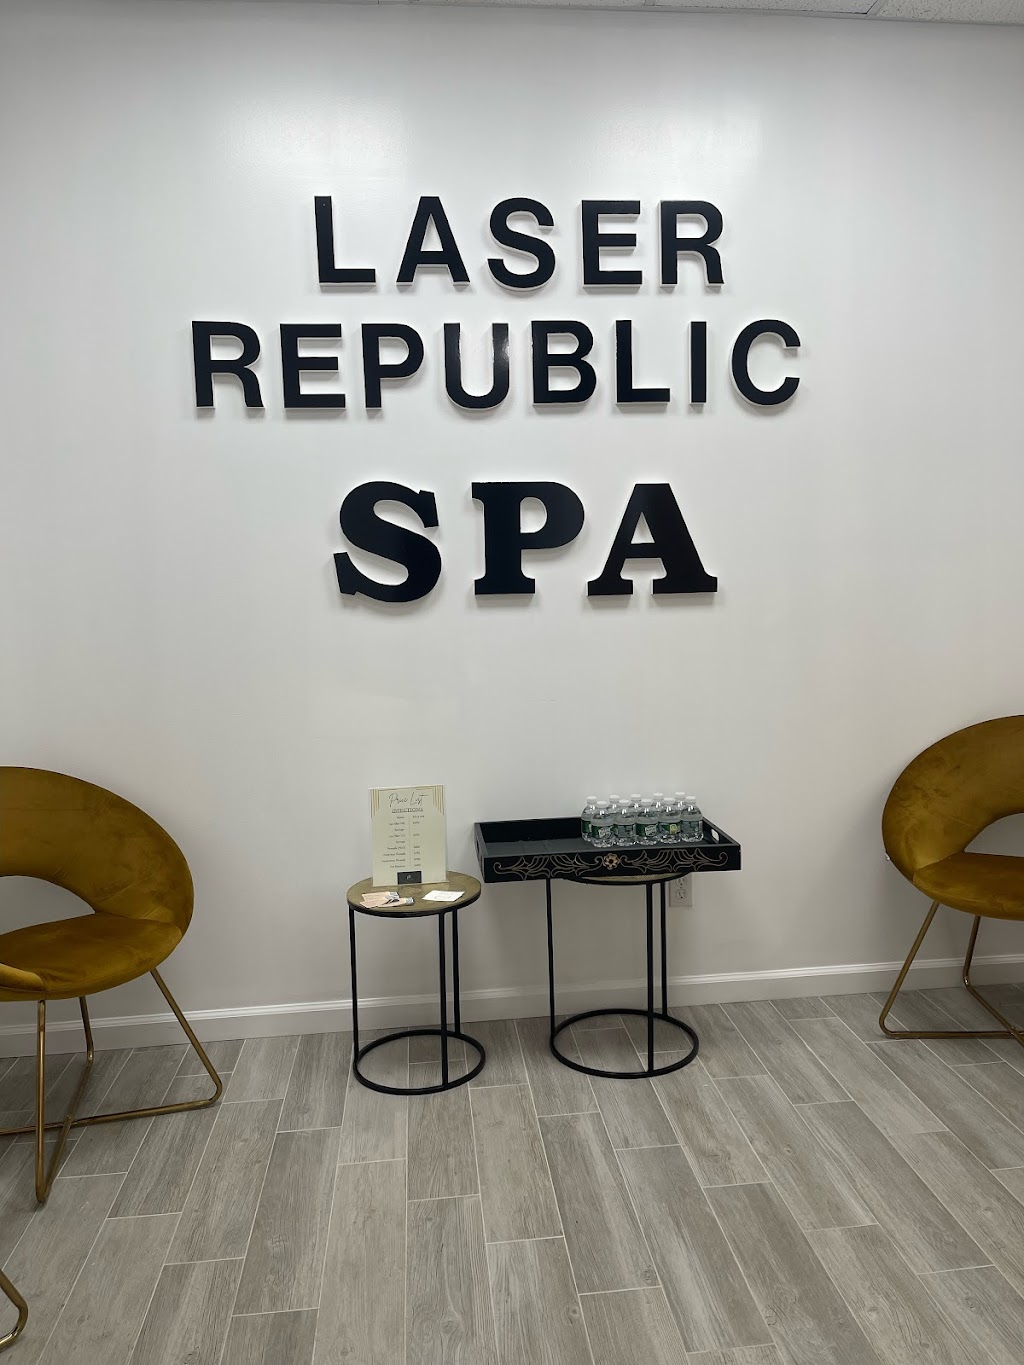 Laser Republic Spa | 822 NY-82 suite 340, Hopewell Junction, NY 12533 | Phone: (845) 444-2154